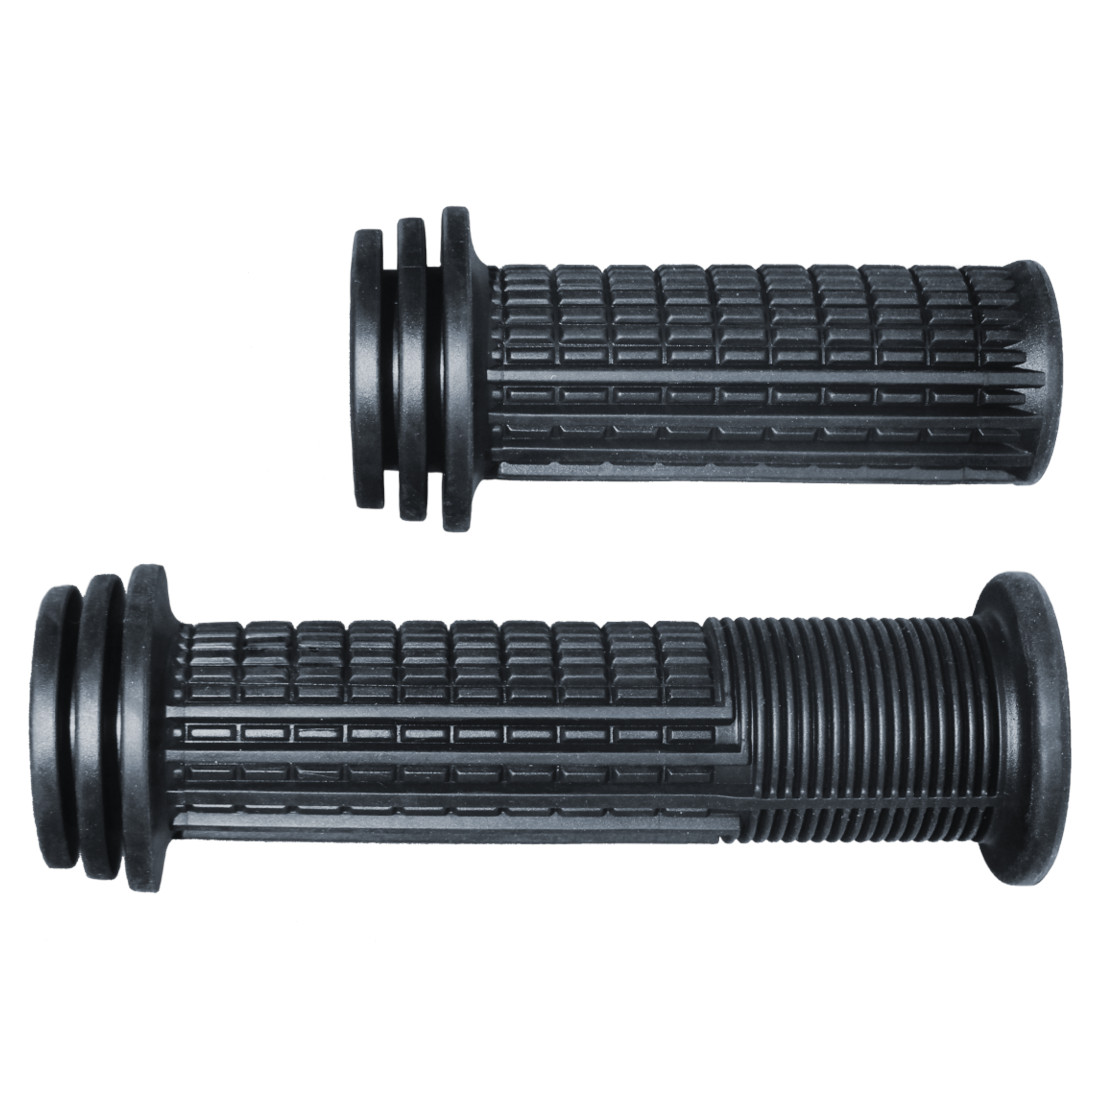 Productfoto van CUBE ACID KIDS Handlebar Grips with Bumper and for Twist Shifter - 22.2mm - black